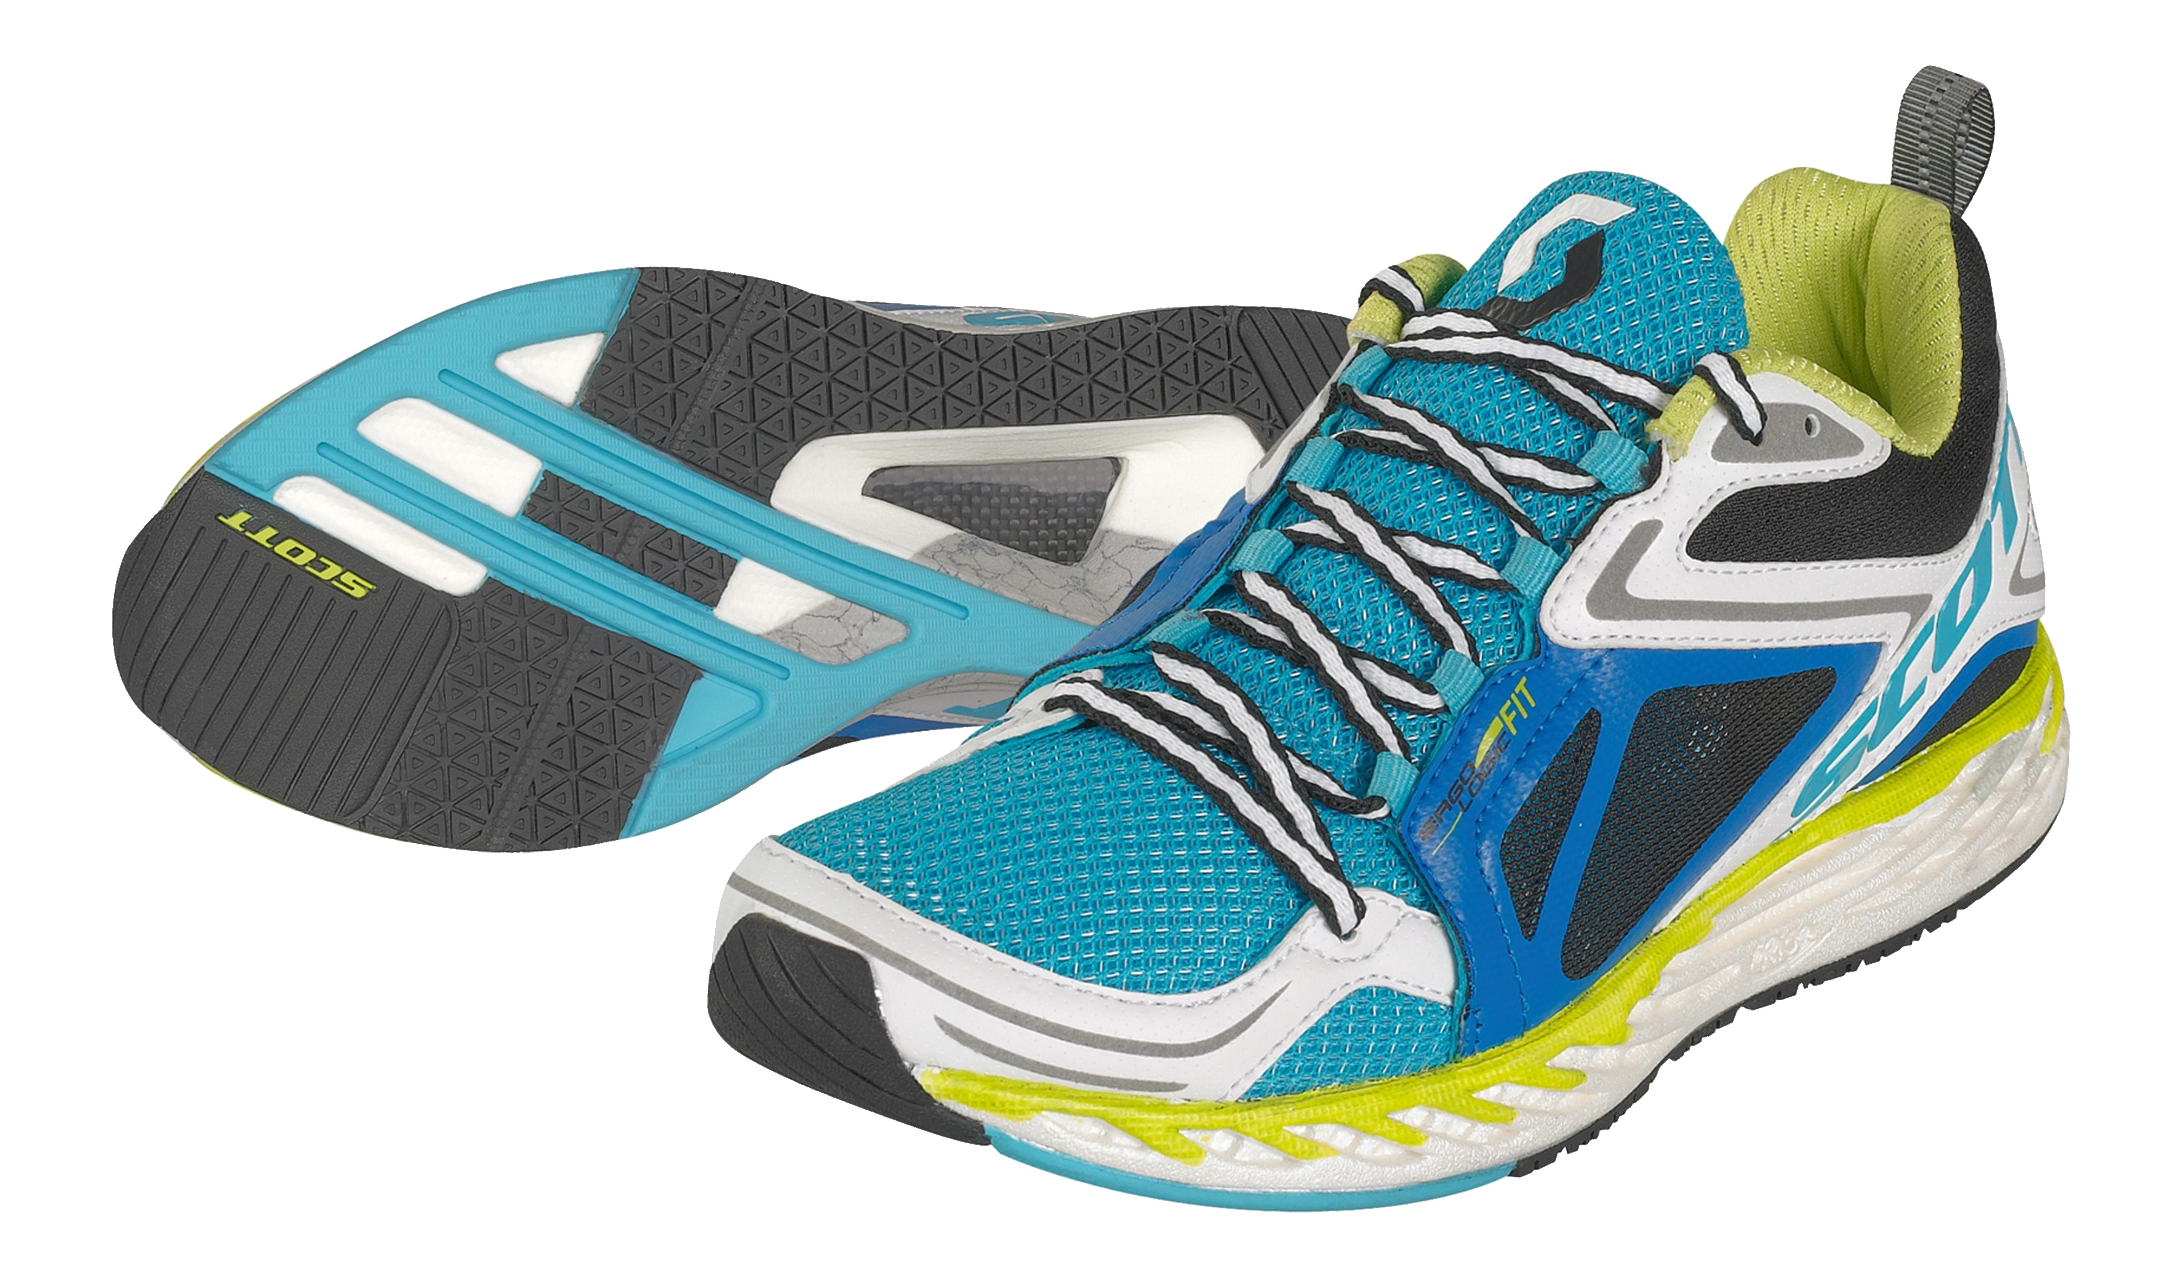 Running Shoes PNG High Definition Photo Image pngteam.com